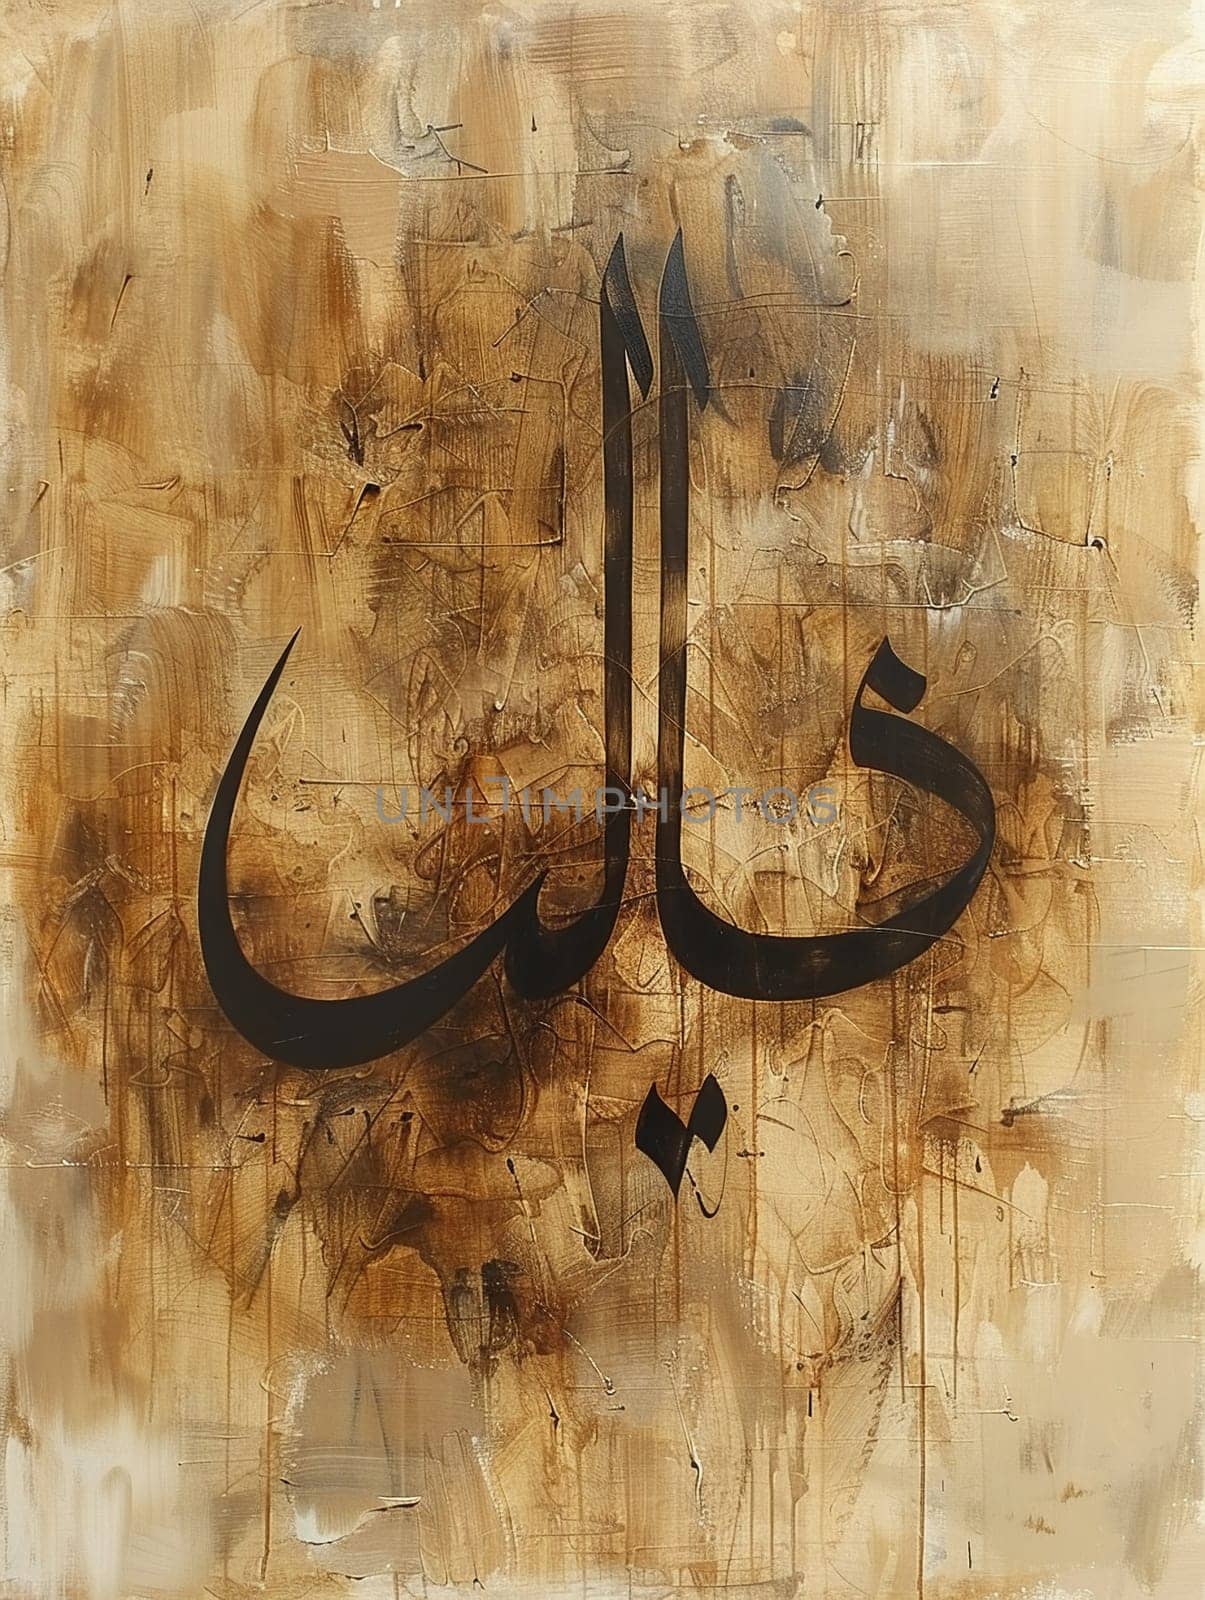 Islamic Calligraphy Flowing on Parchment, The graceful script blurs into art, conveying the beauty of Allah's words.